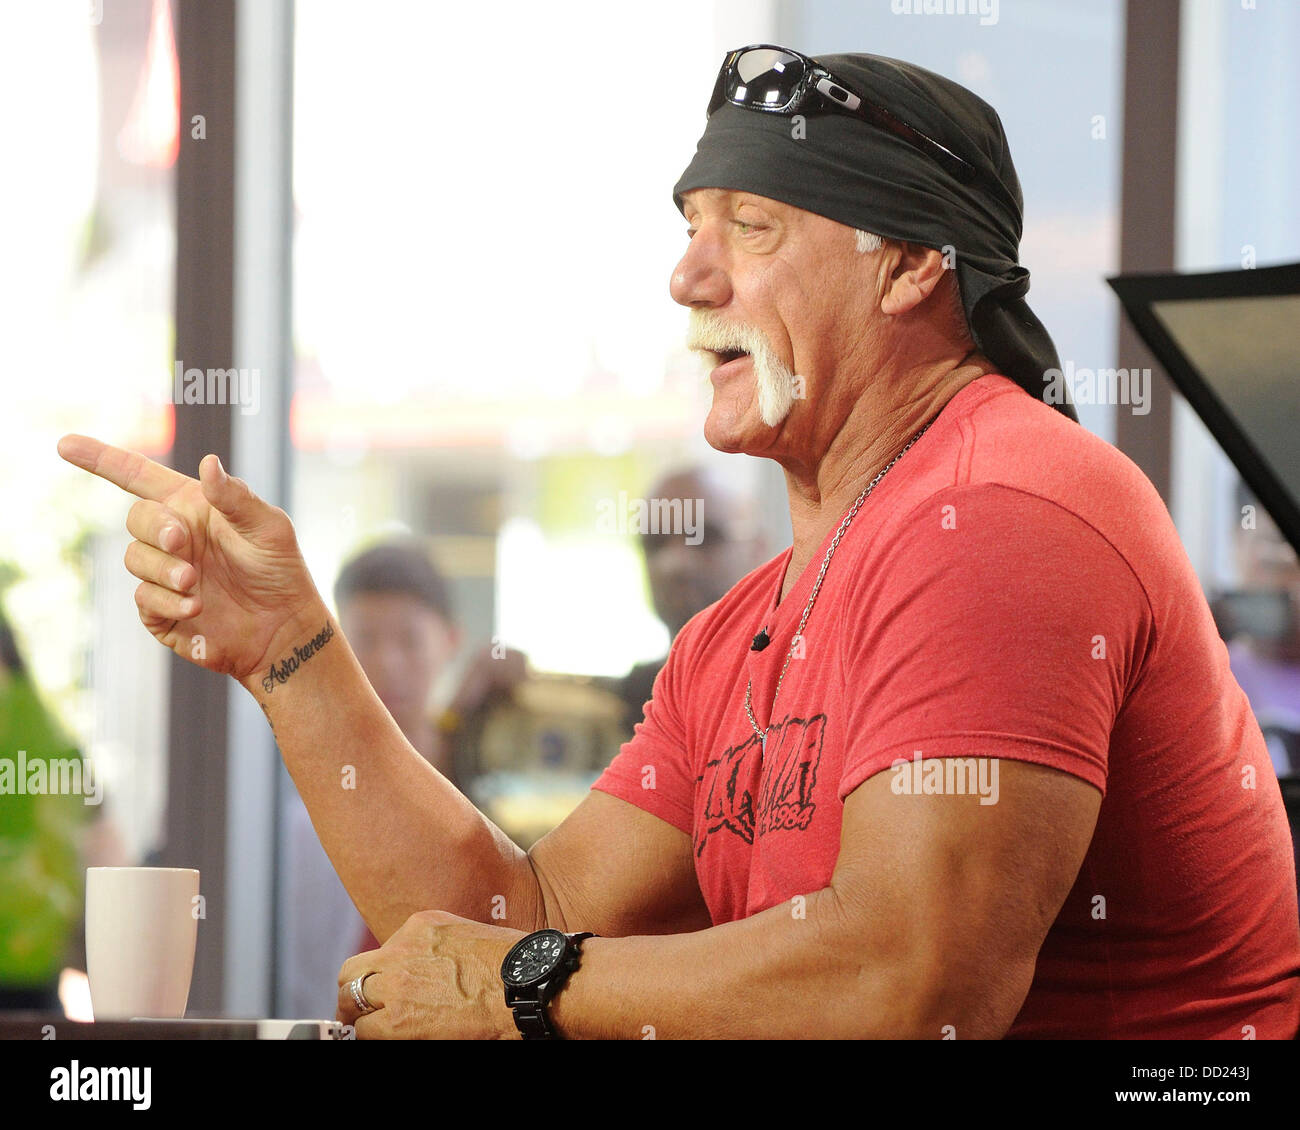 Toronto, Canada. 23 Aug 2013. Professional wrestler Hulk Hogan appears on  Global TV's The Morning Show in Toronto. Credit: EXImages/Alamy Live News  Stock Photo - Alamy